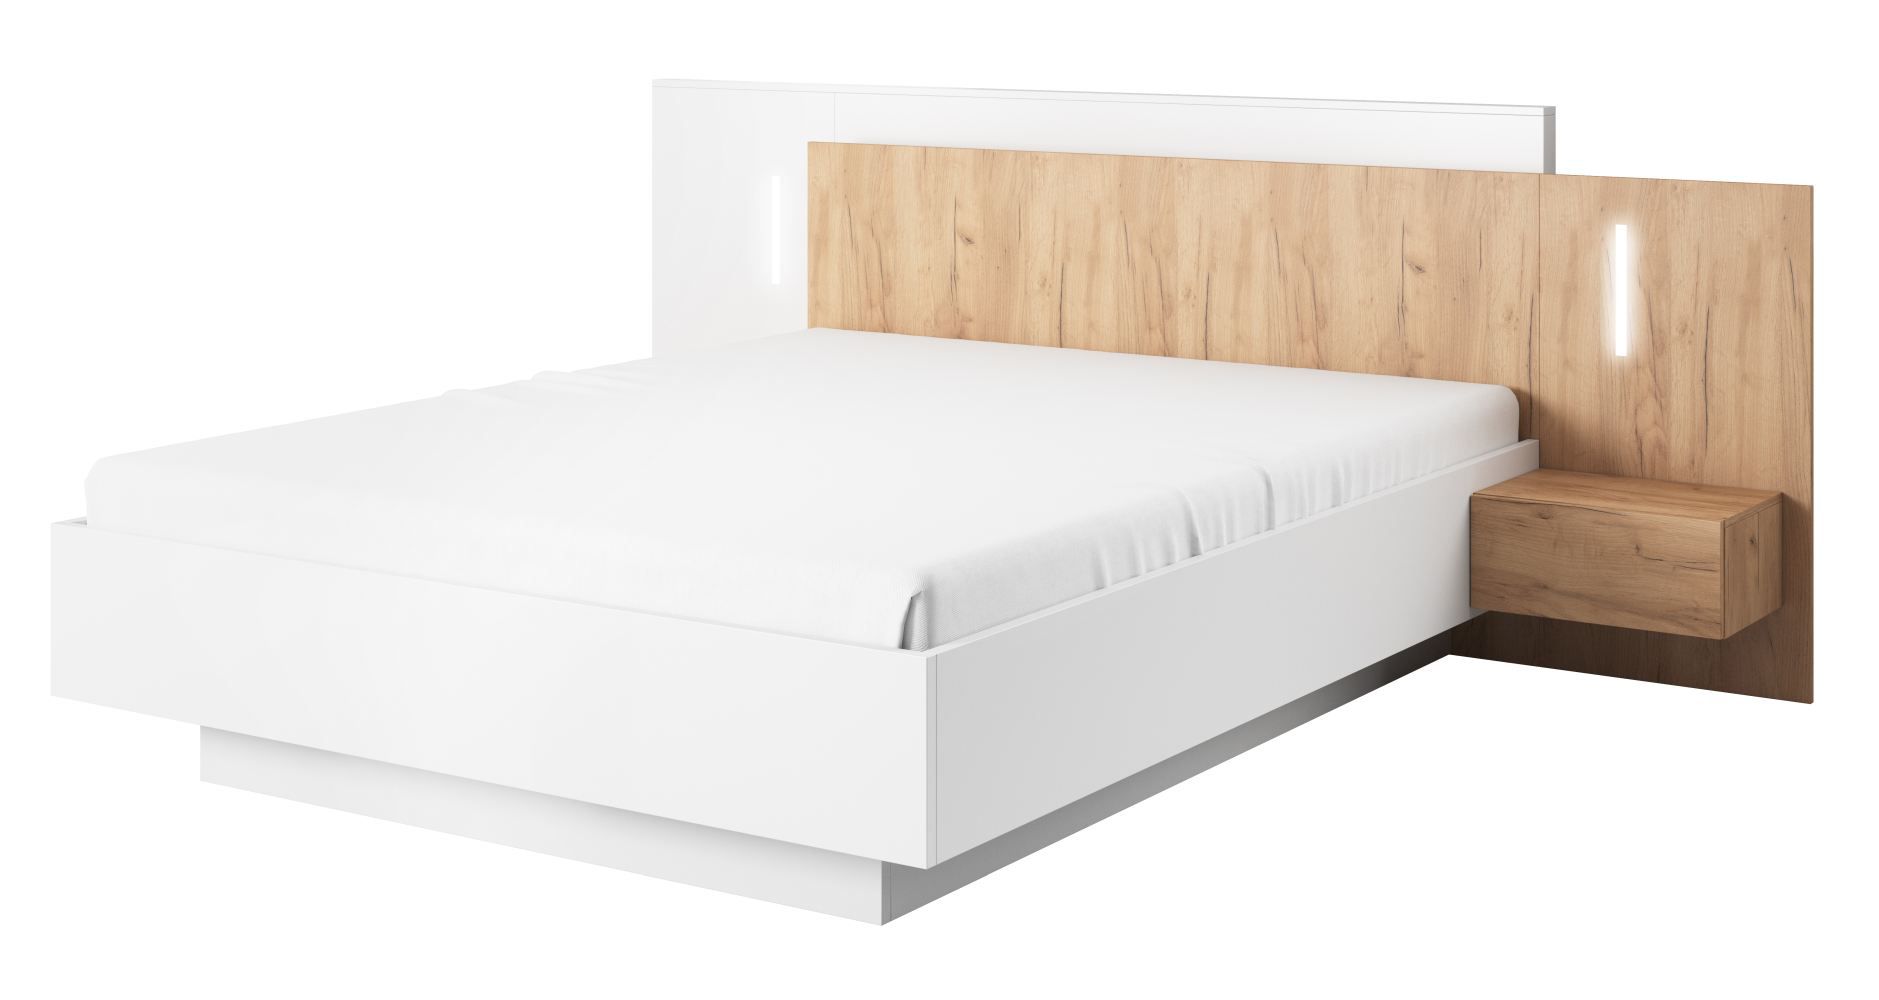 Double bed with bedside cabinets Gremda 06, color: oak / white - lying surface: 160 x 200 cm (W x L) Set incl. fold-up bed frame